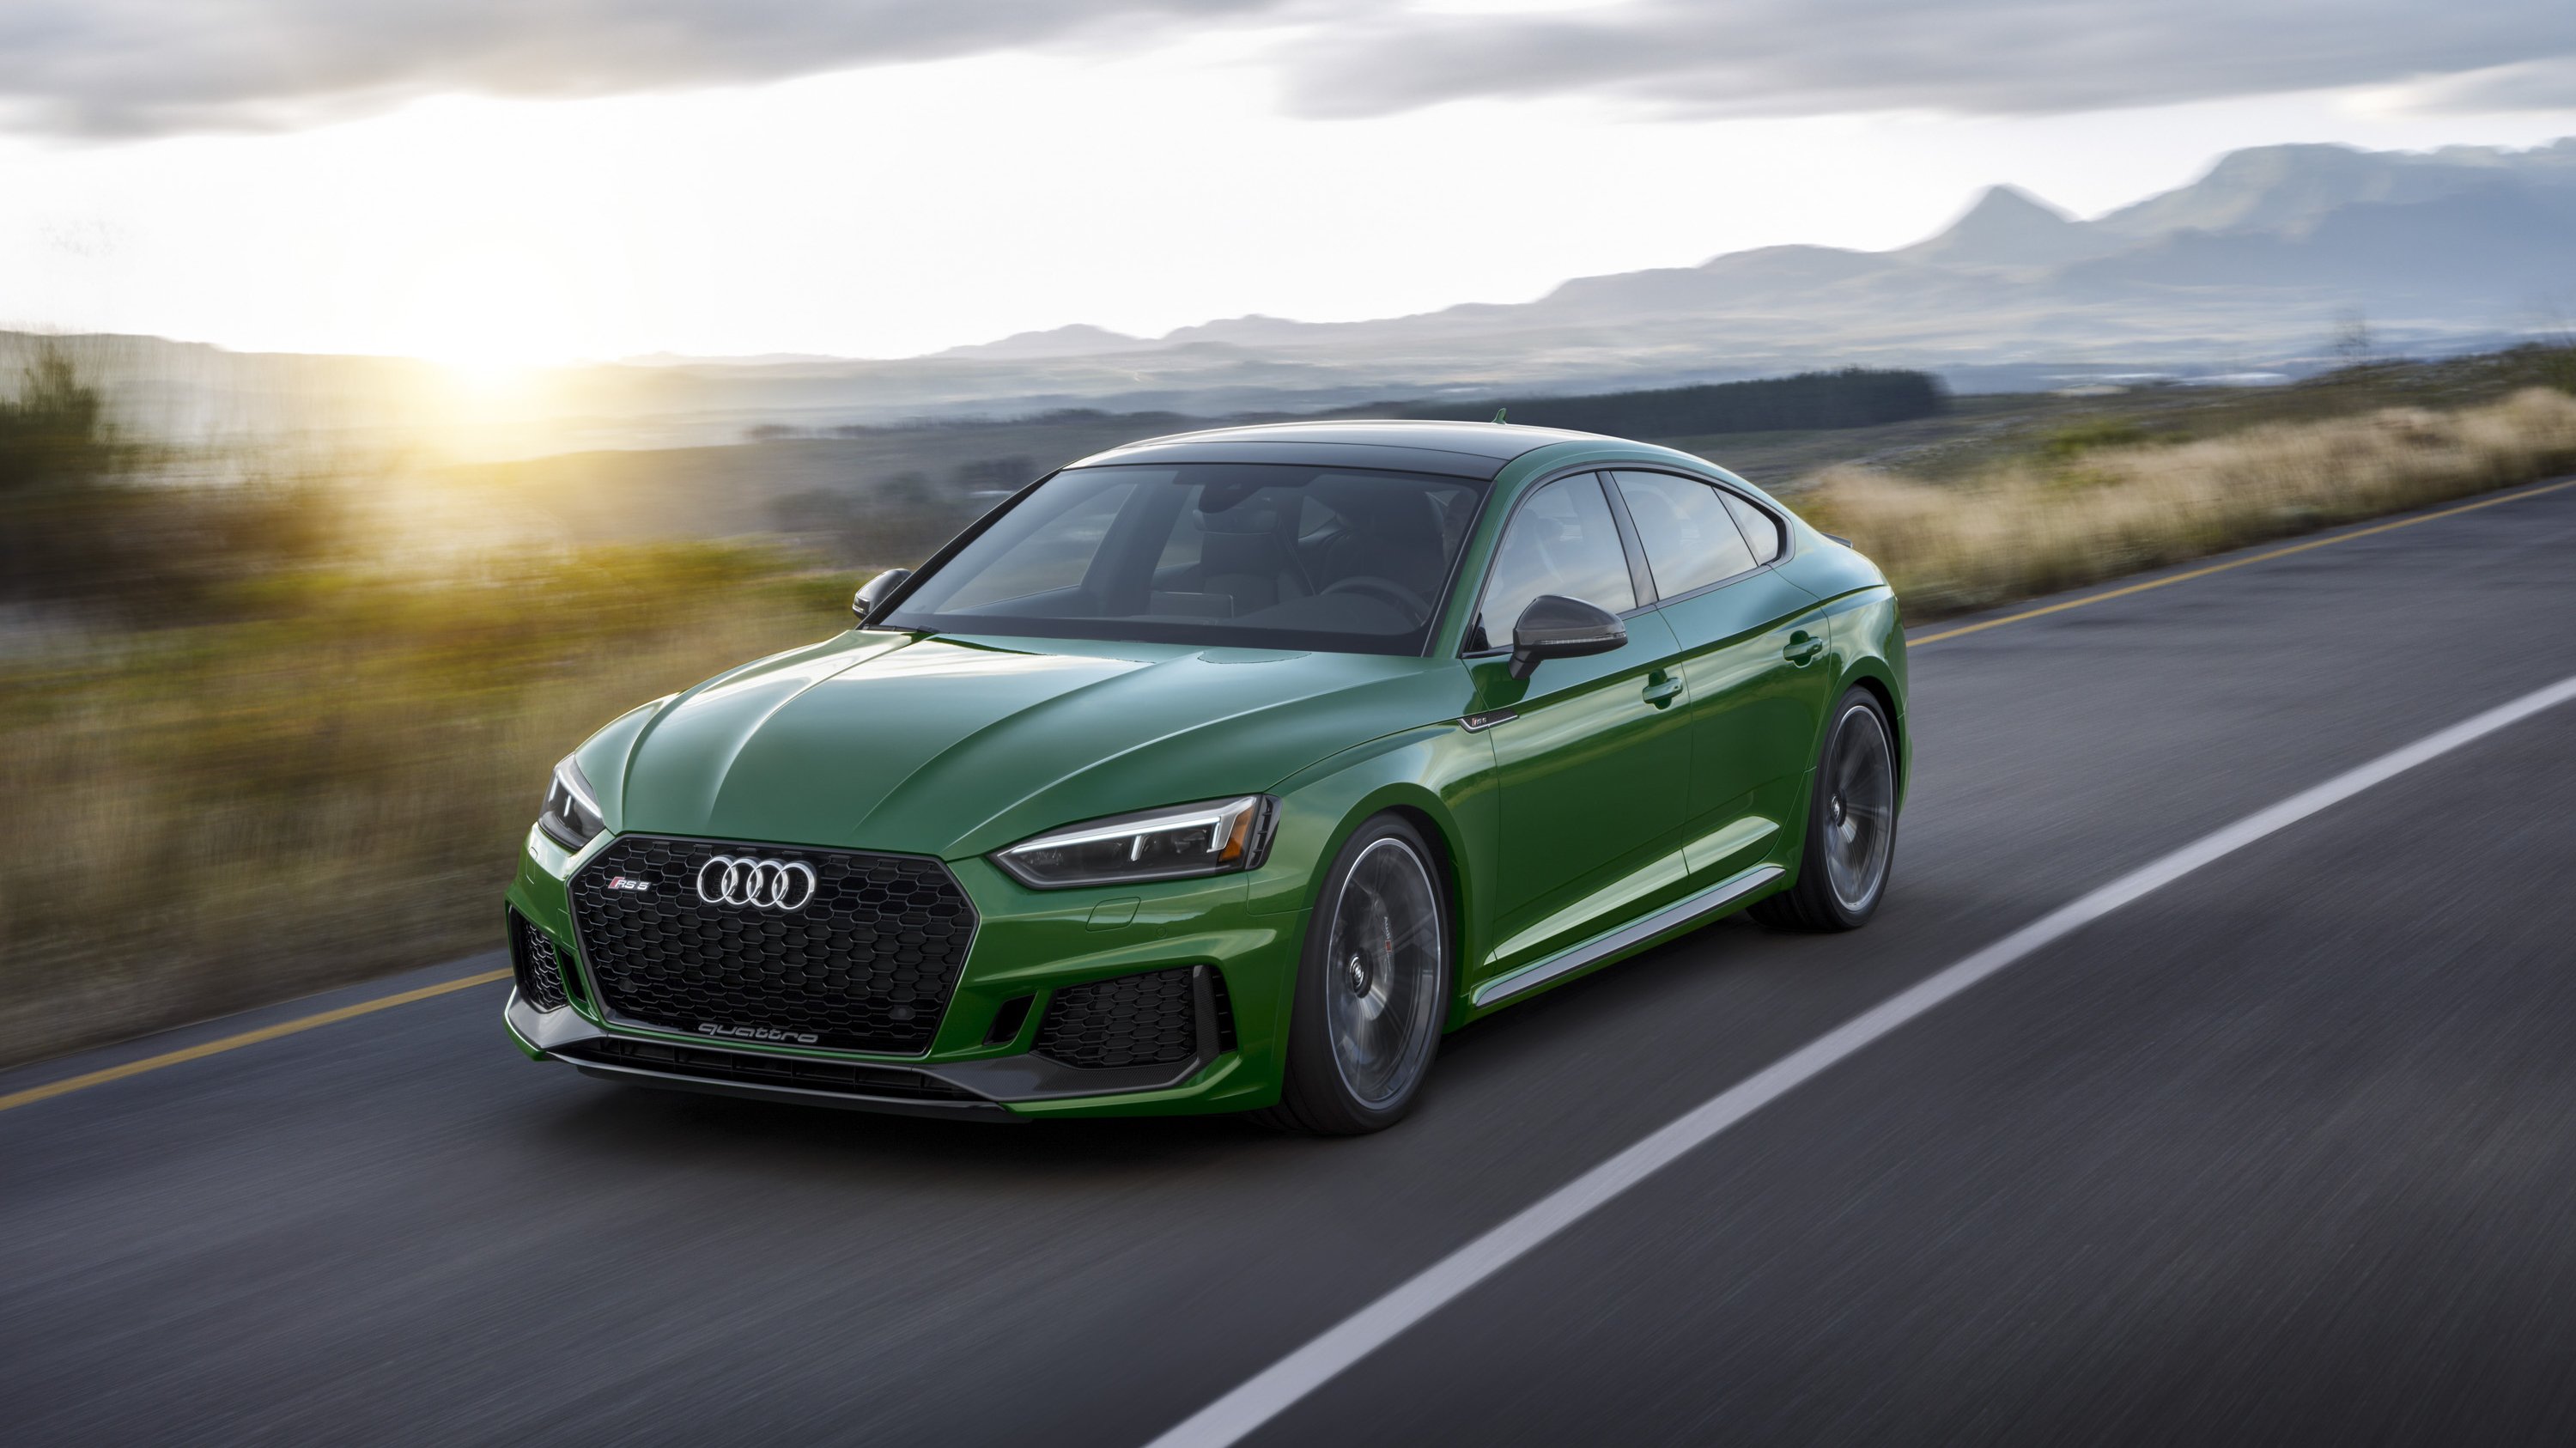 2019 Audi Rs5 Sportback Pictures, Photos, Wallpapers - 2019 Audi Rs5 Sportback , HD Wallpaper & Backgrounds